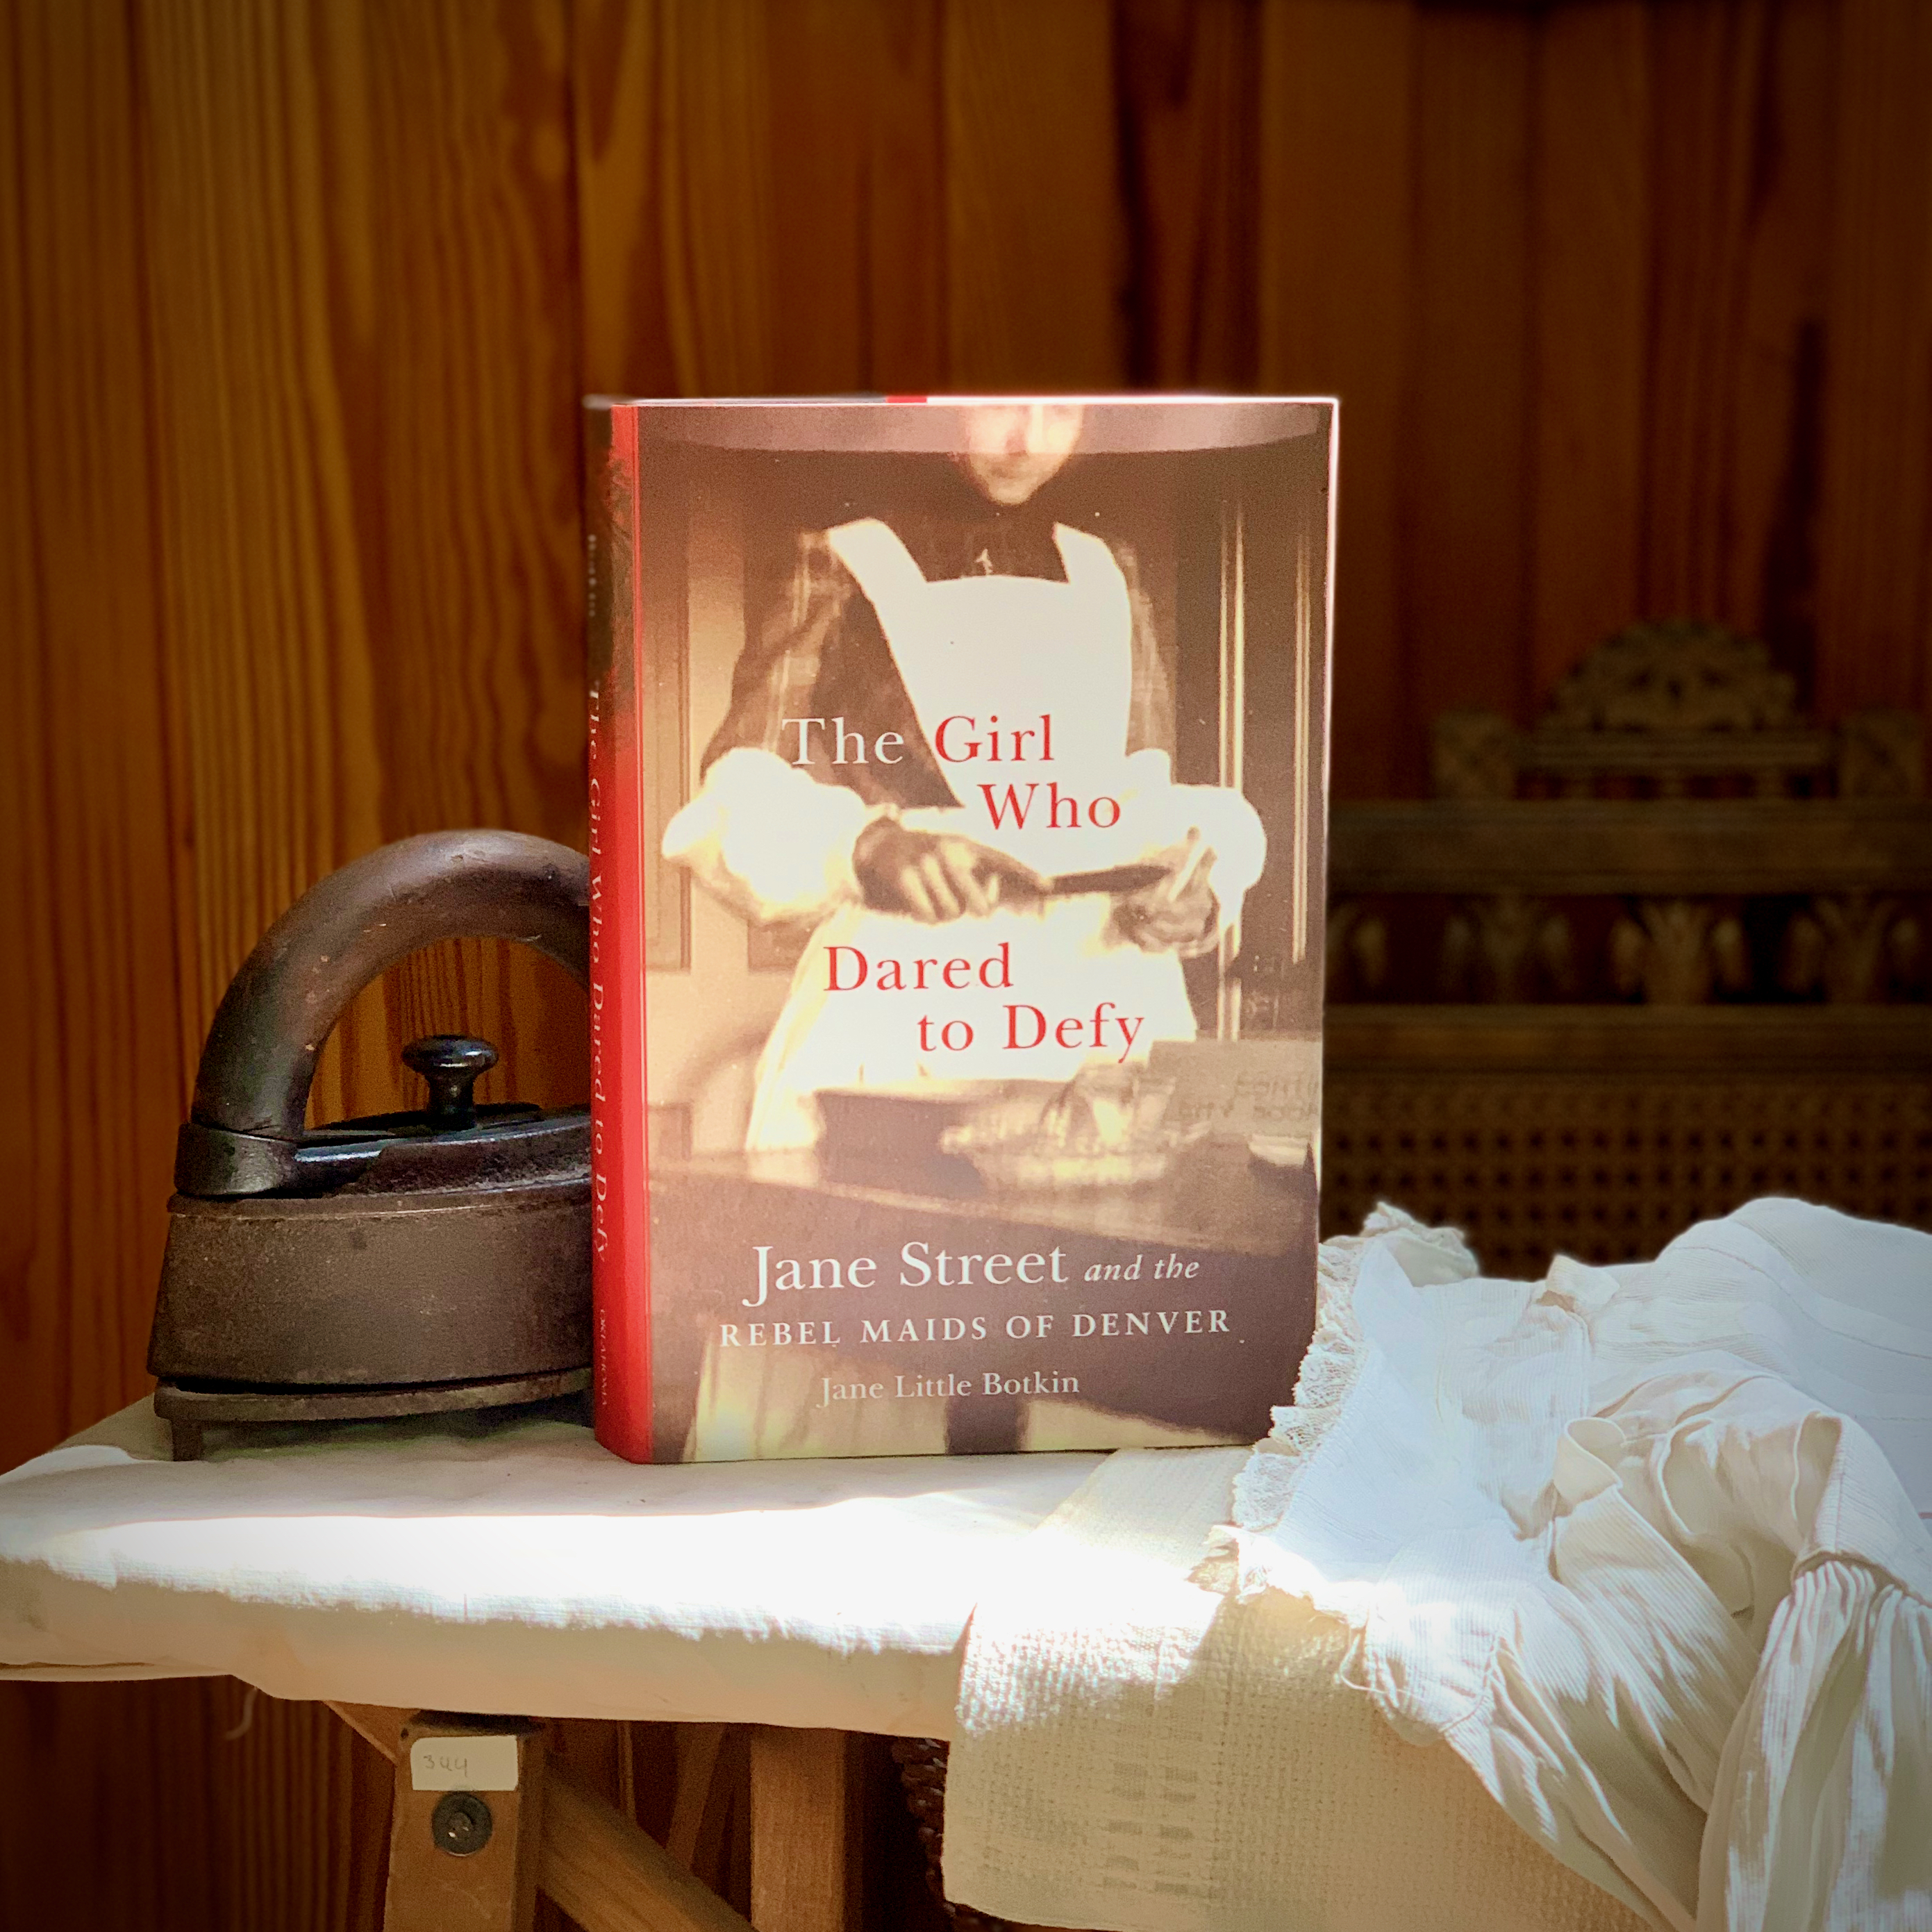 Photo of a book sitting on an ironing board, next to an antique iron and a white garment. Titled "The Girl Who Dared to Defy: Jane Street and the Rebel Maids of Denver," the cover is a black and white image of a female who wears a dark colored dress over which a long white bibbed apron is worn. She is standing in front of a table with a shallow small bowl and what appears to be a rectangular cooking pan. Although only part of her face is seen, she looks down at an open book she holds in her hands.